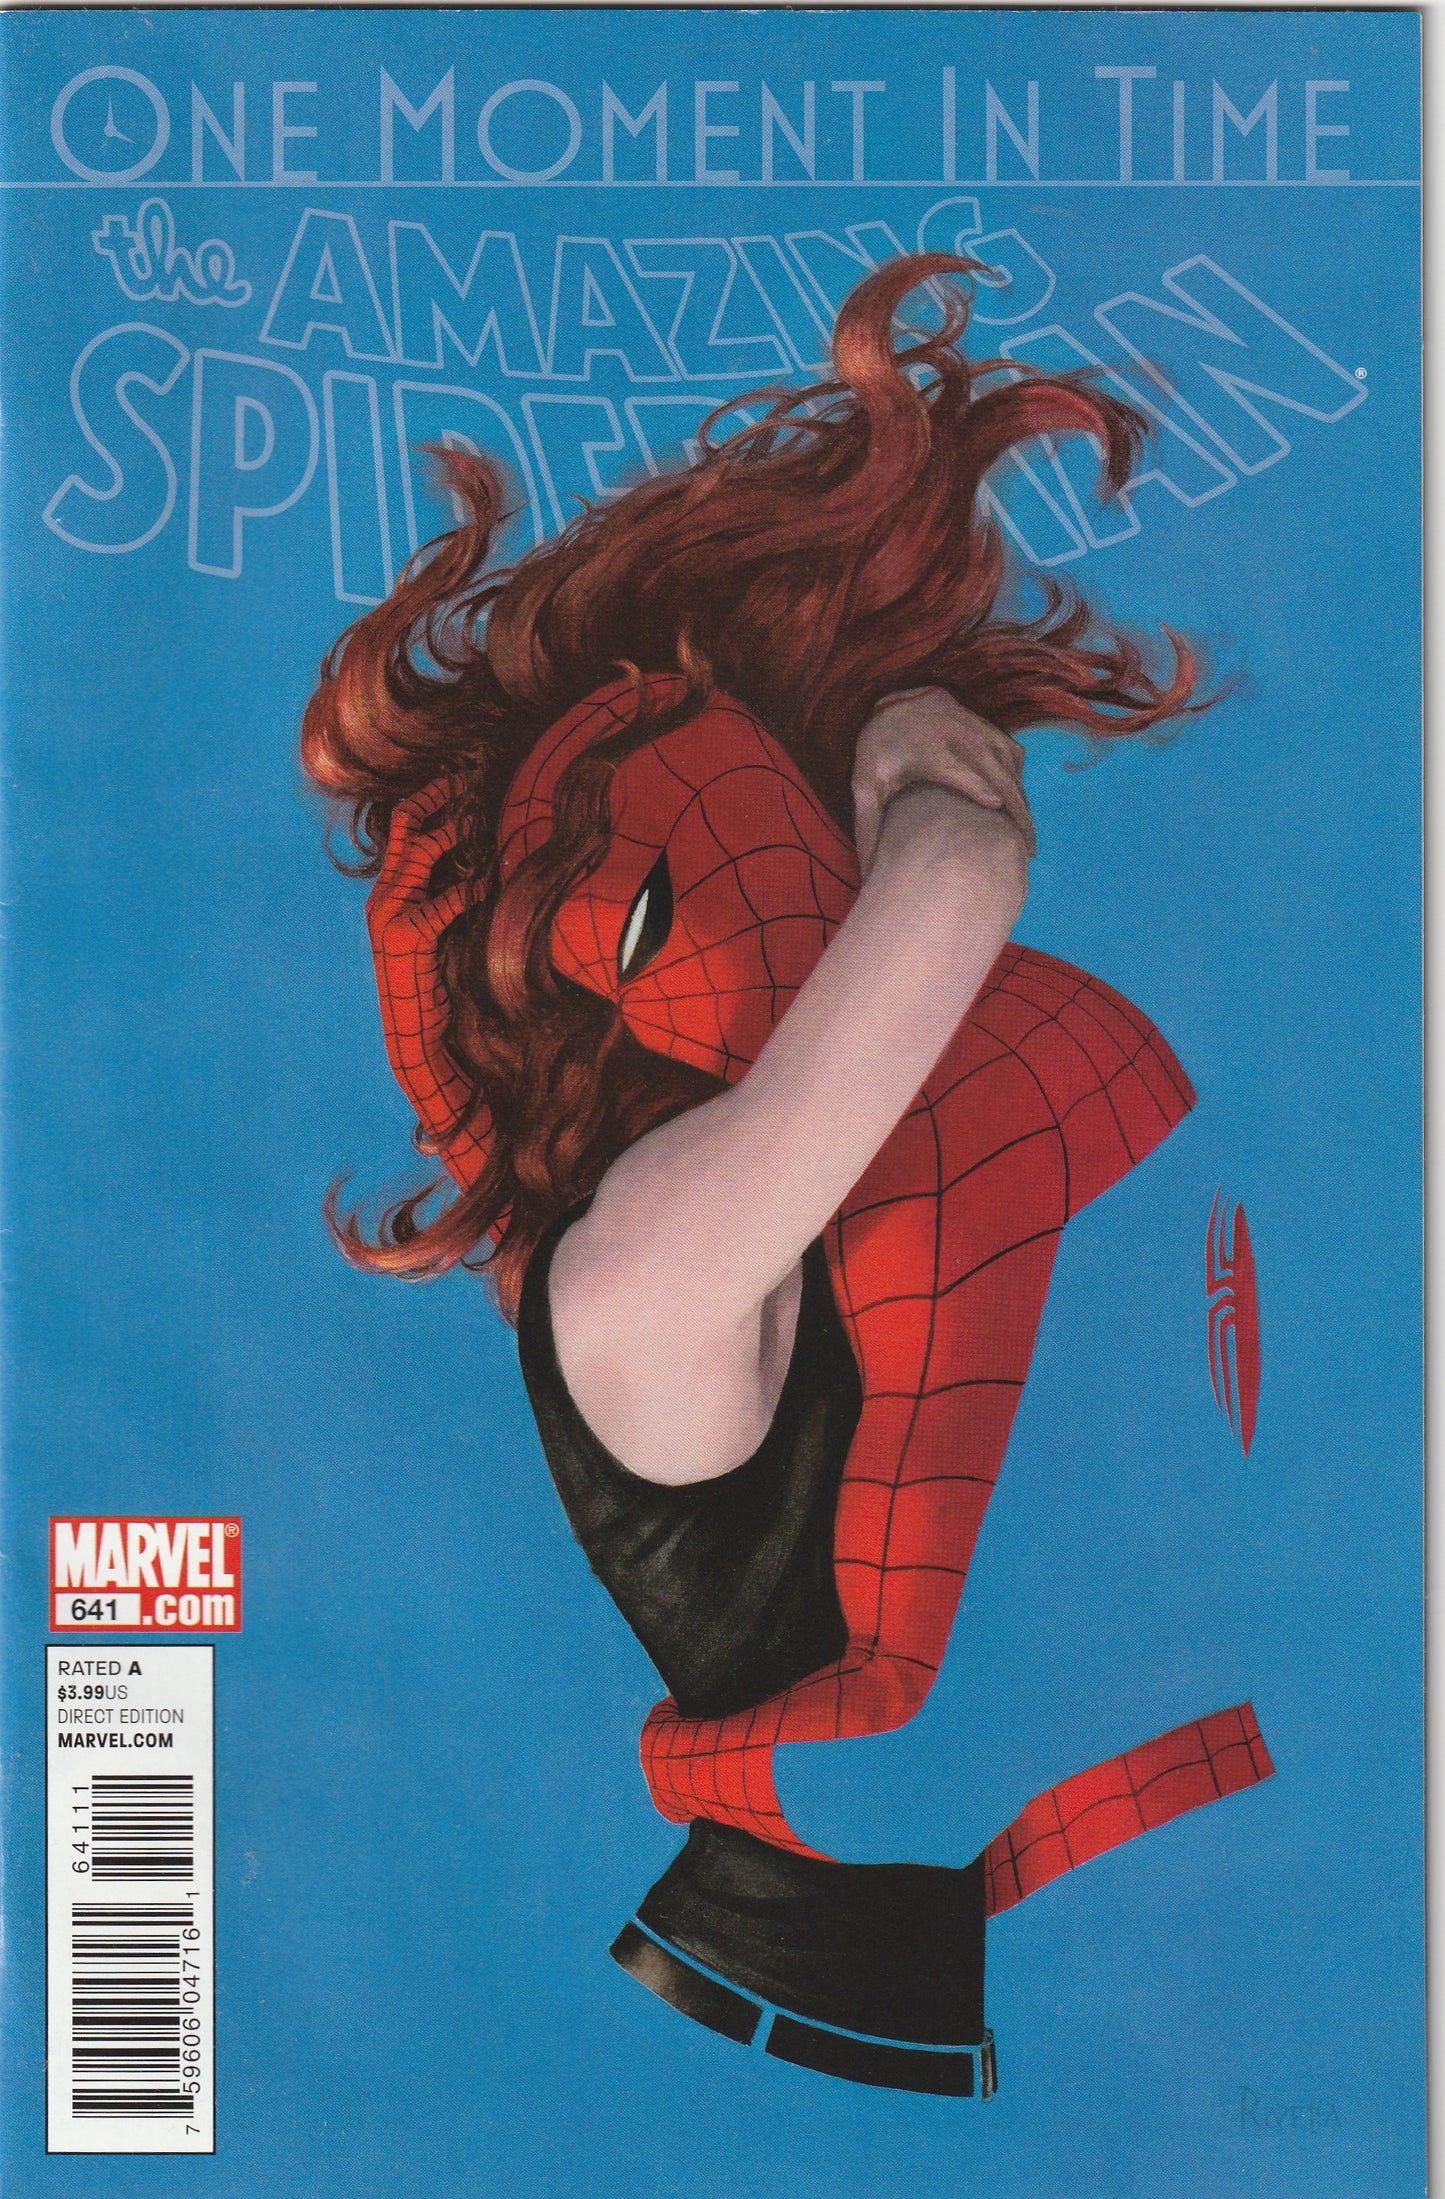 Amazing Spider-Man #641 (2010) - One Moment in Time